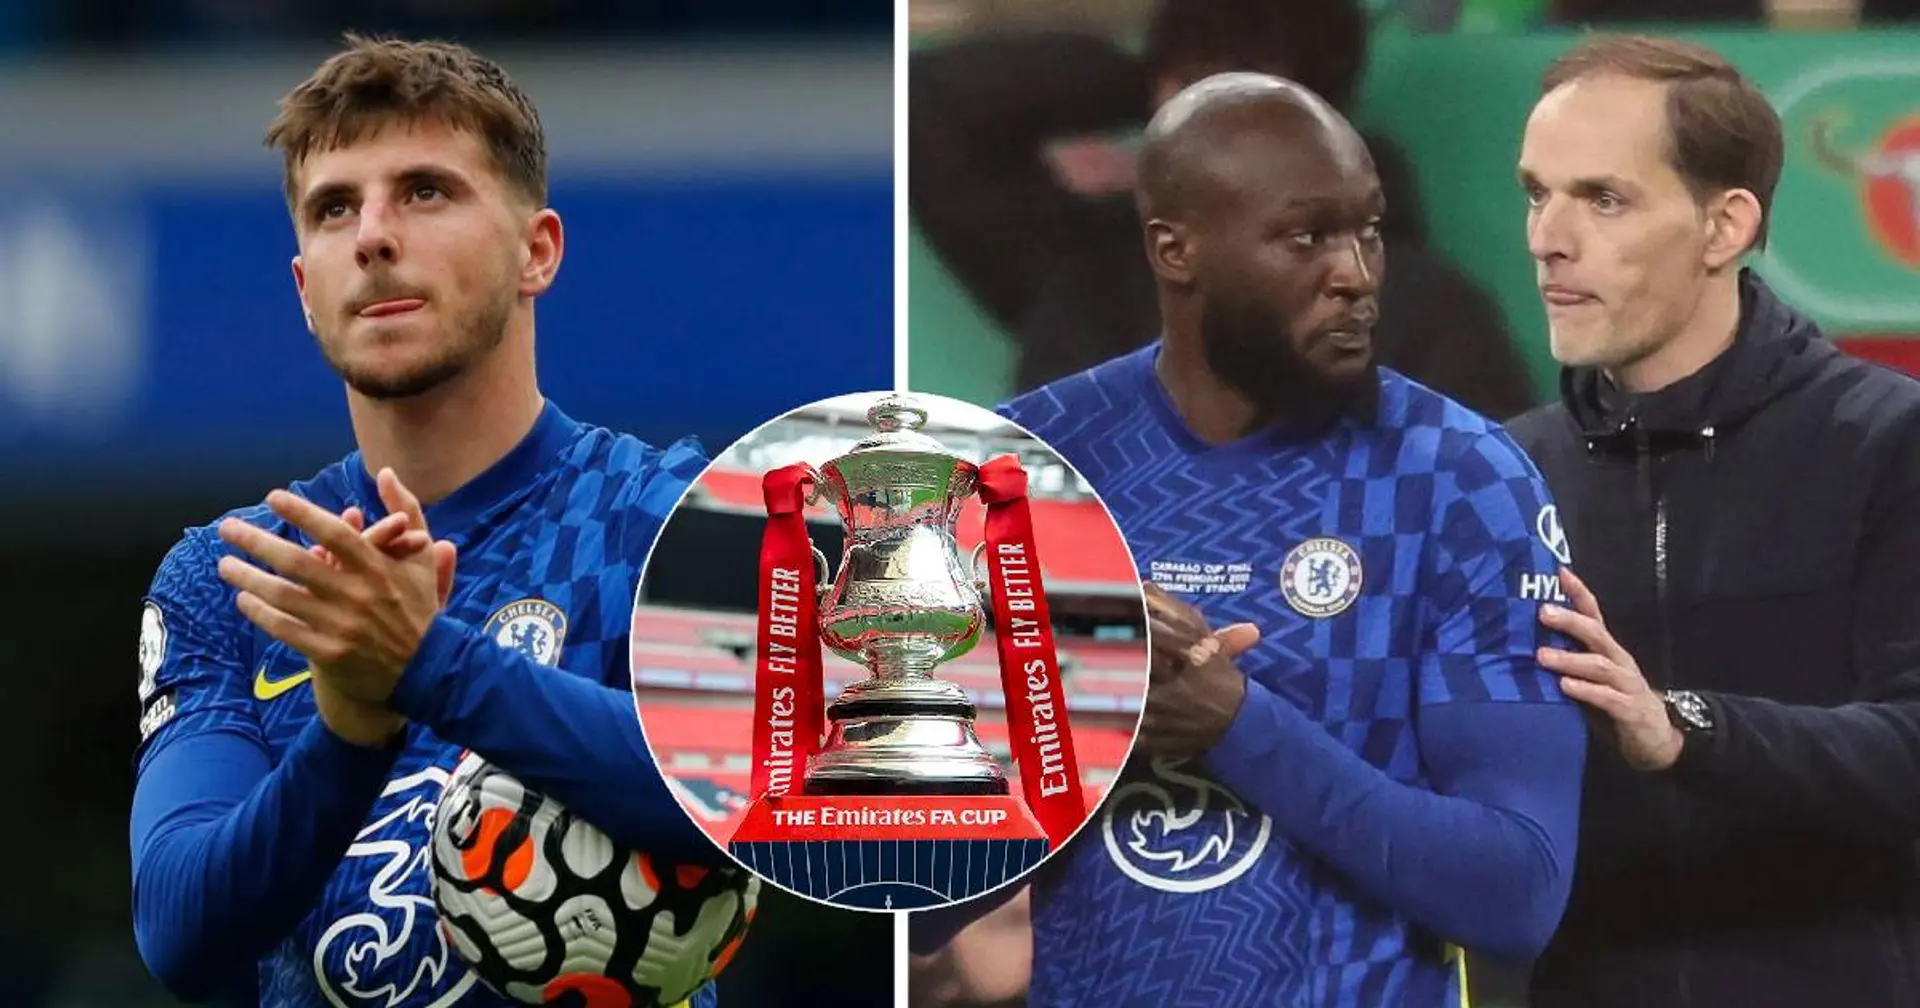 Revealed: How much in bonuses Chelsea players can earn by winning FA Cup final